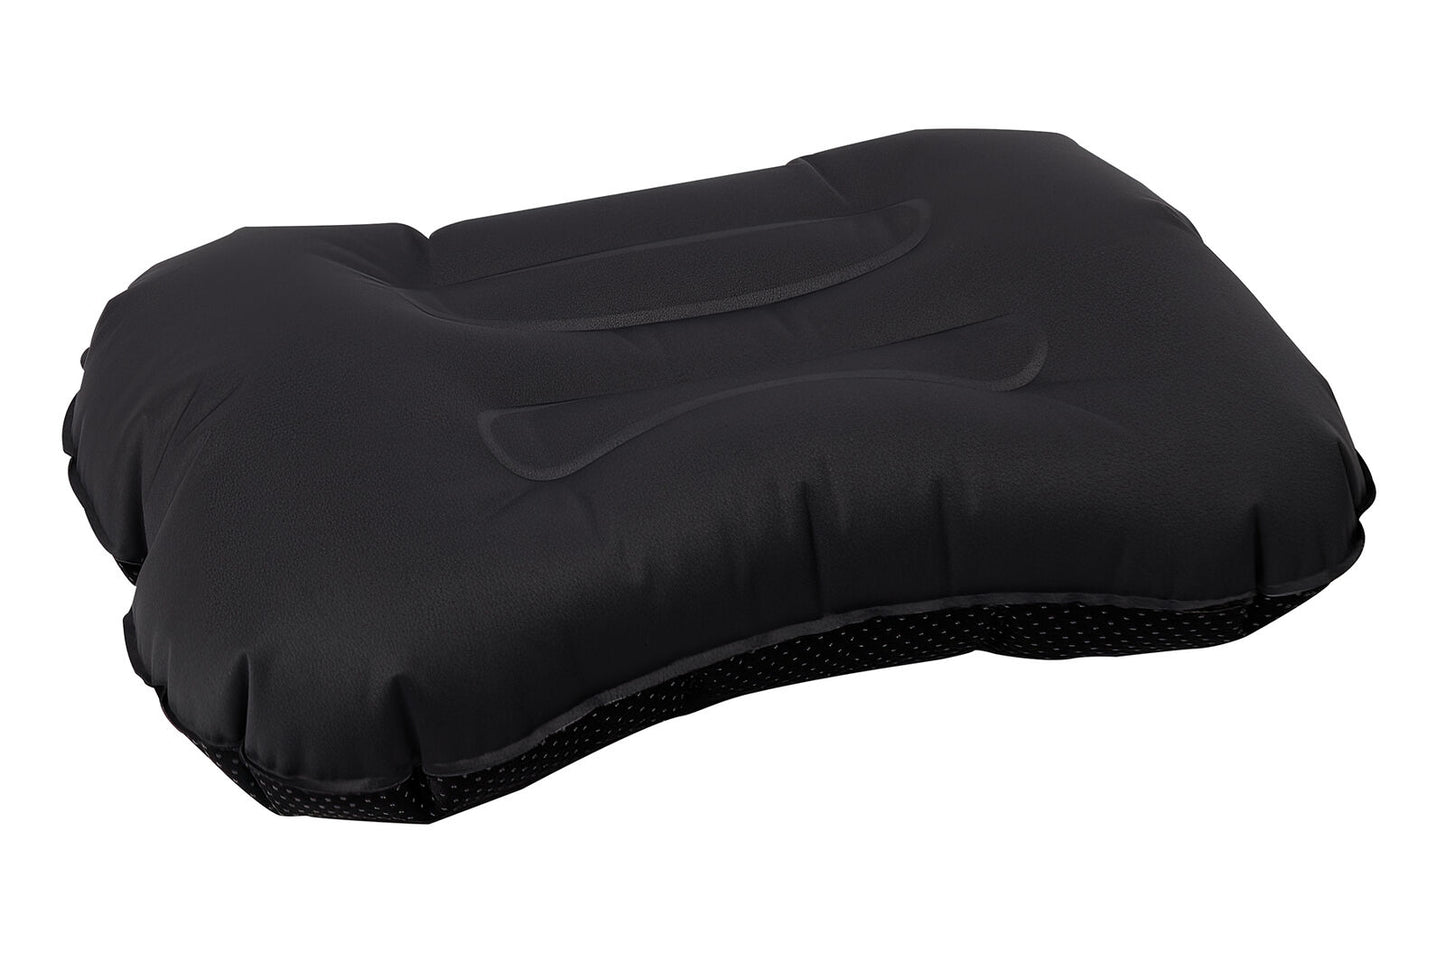 Inflatable Camping Pillow With Travel Bag - Provides Head or Lumbar Support